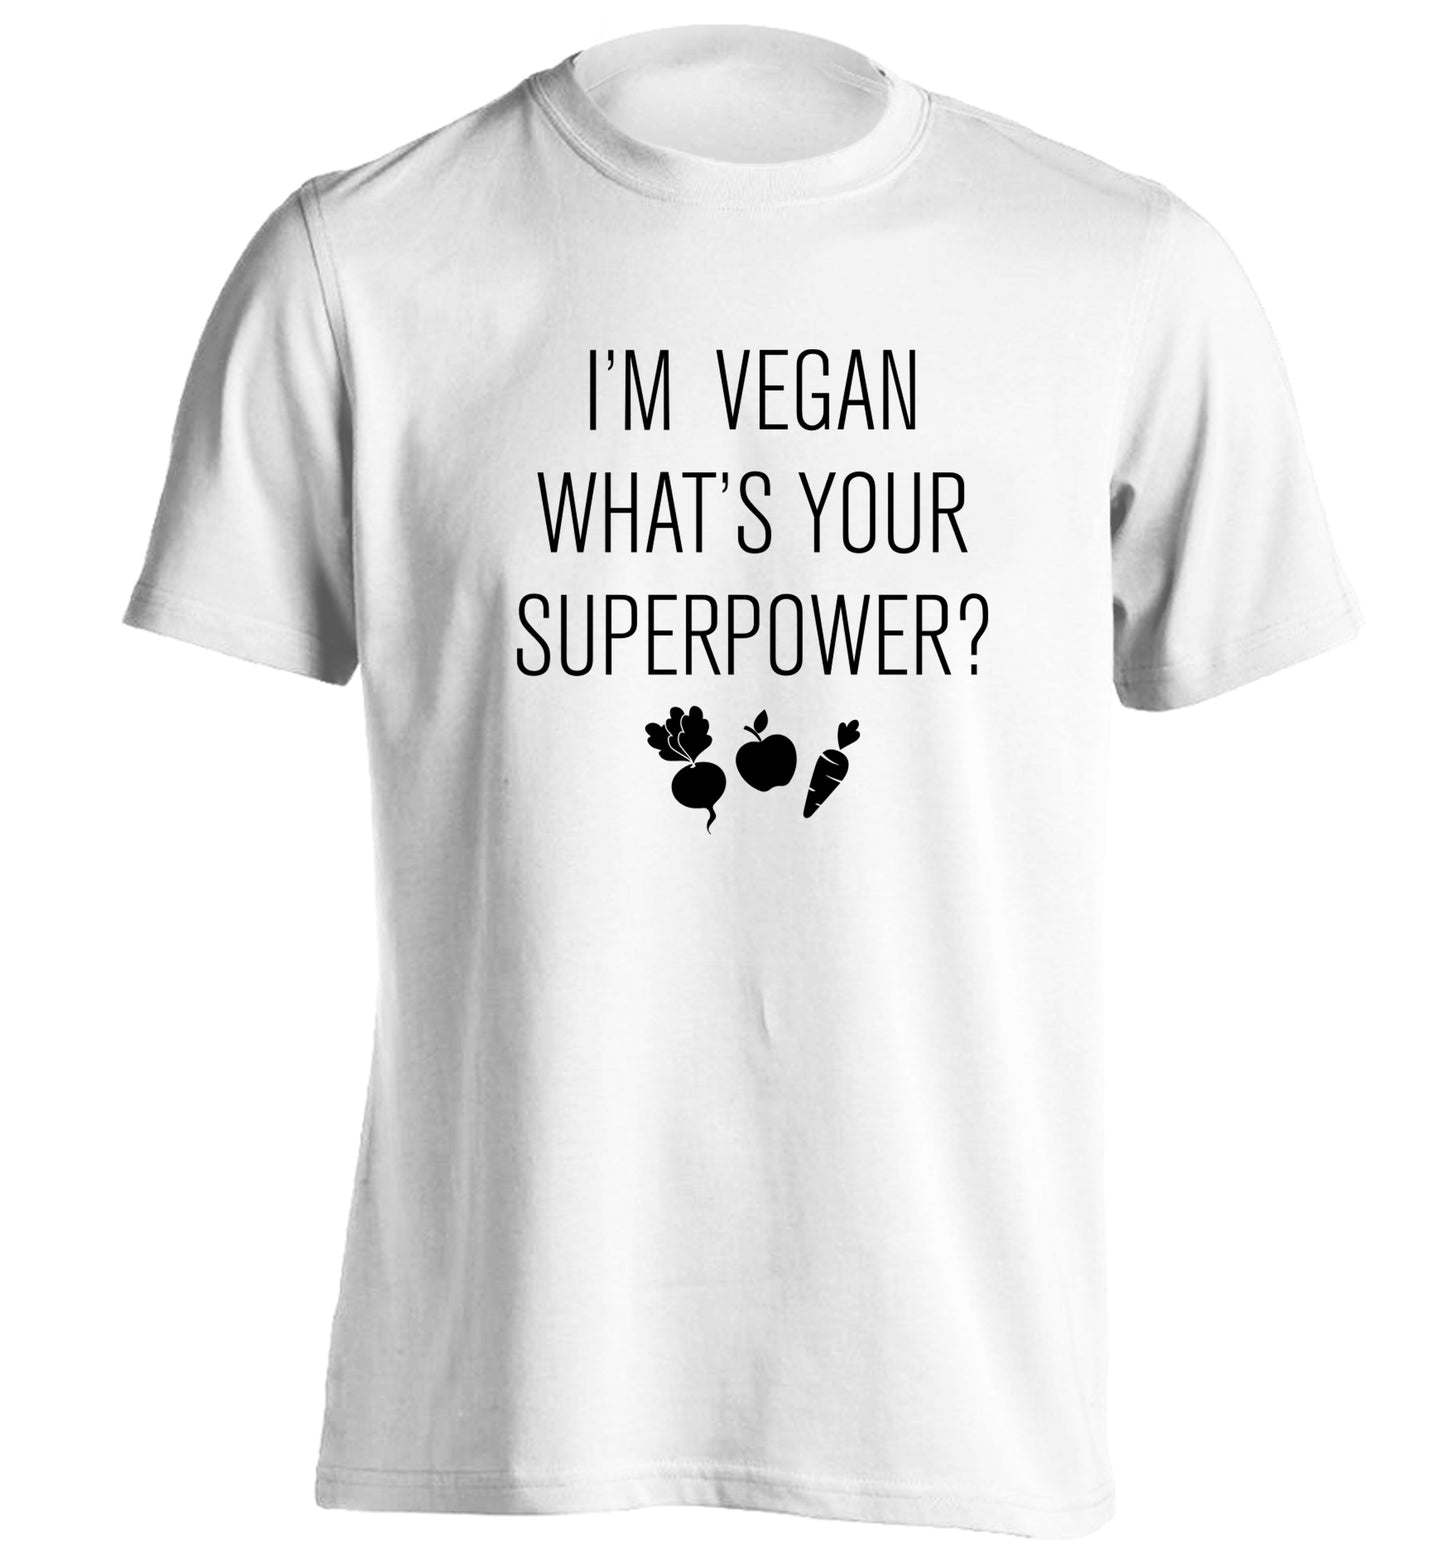 I'm Vegan What's Your Superpower? adults unisex white Tshirt 2XL